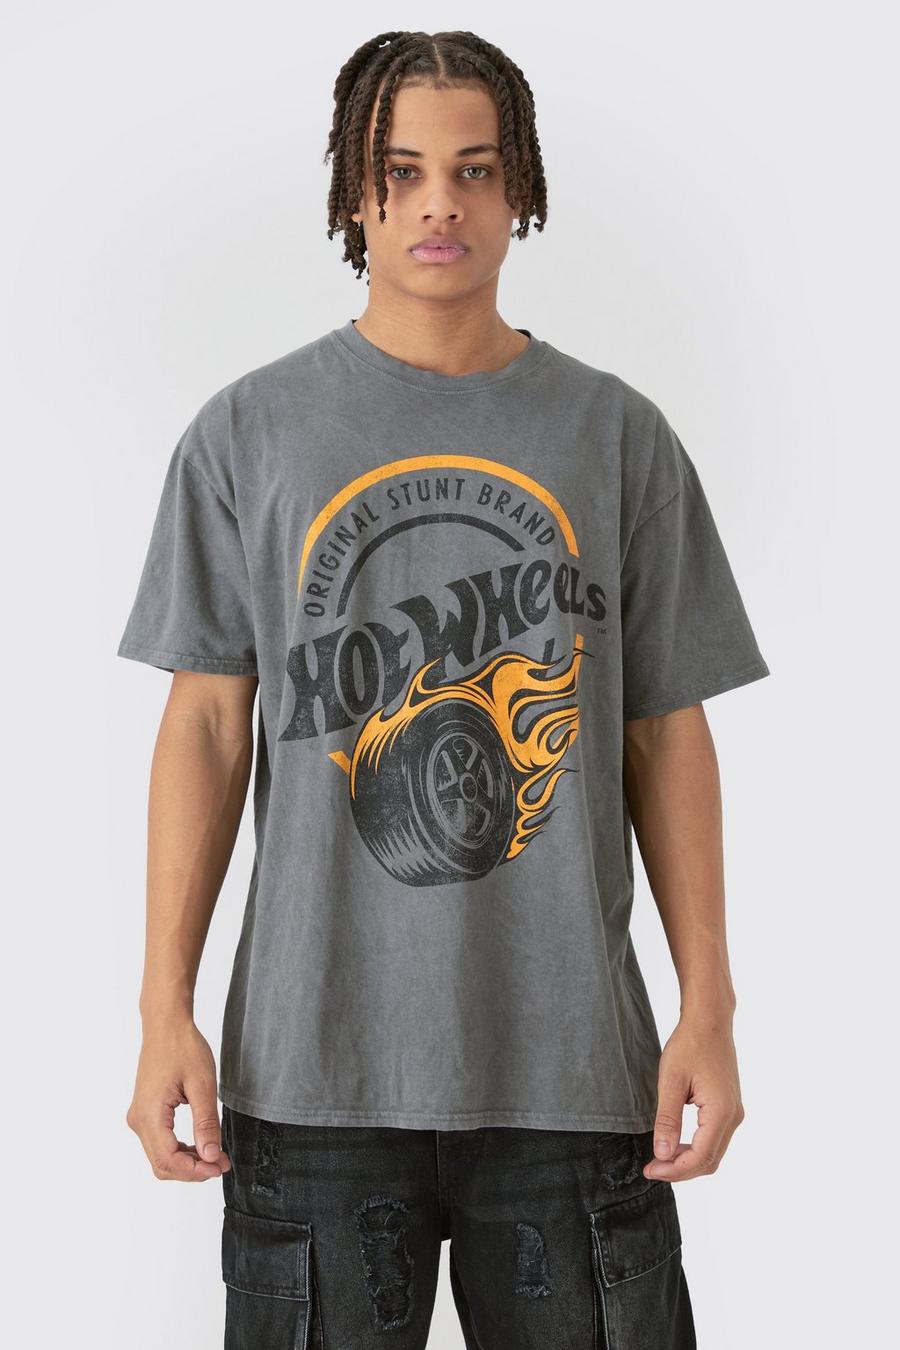 T-shirt oversize ufficiale Hotwheels in lavaggio, Charcoal